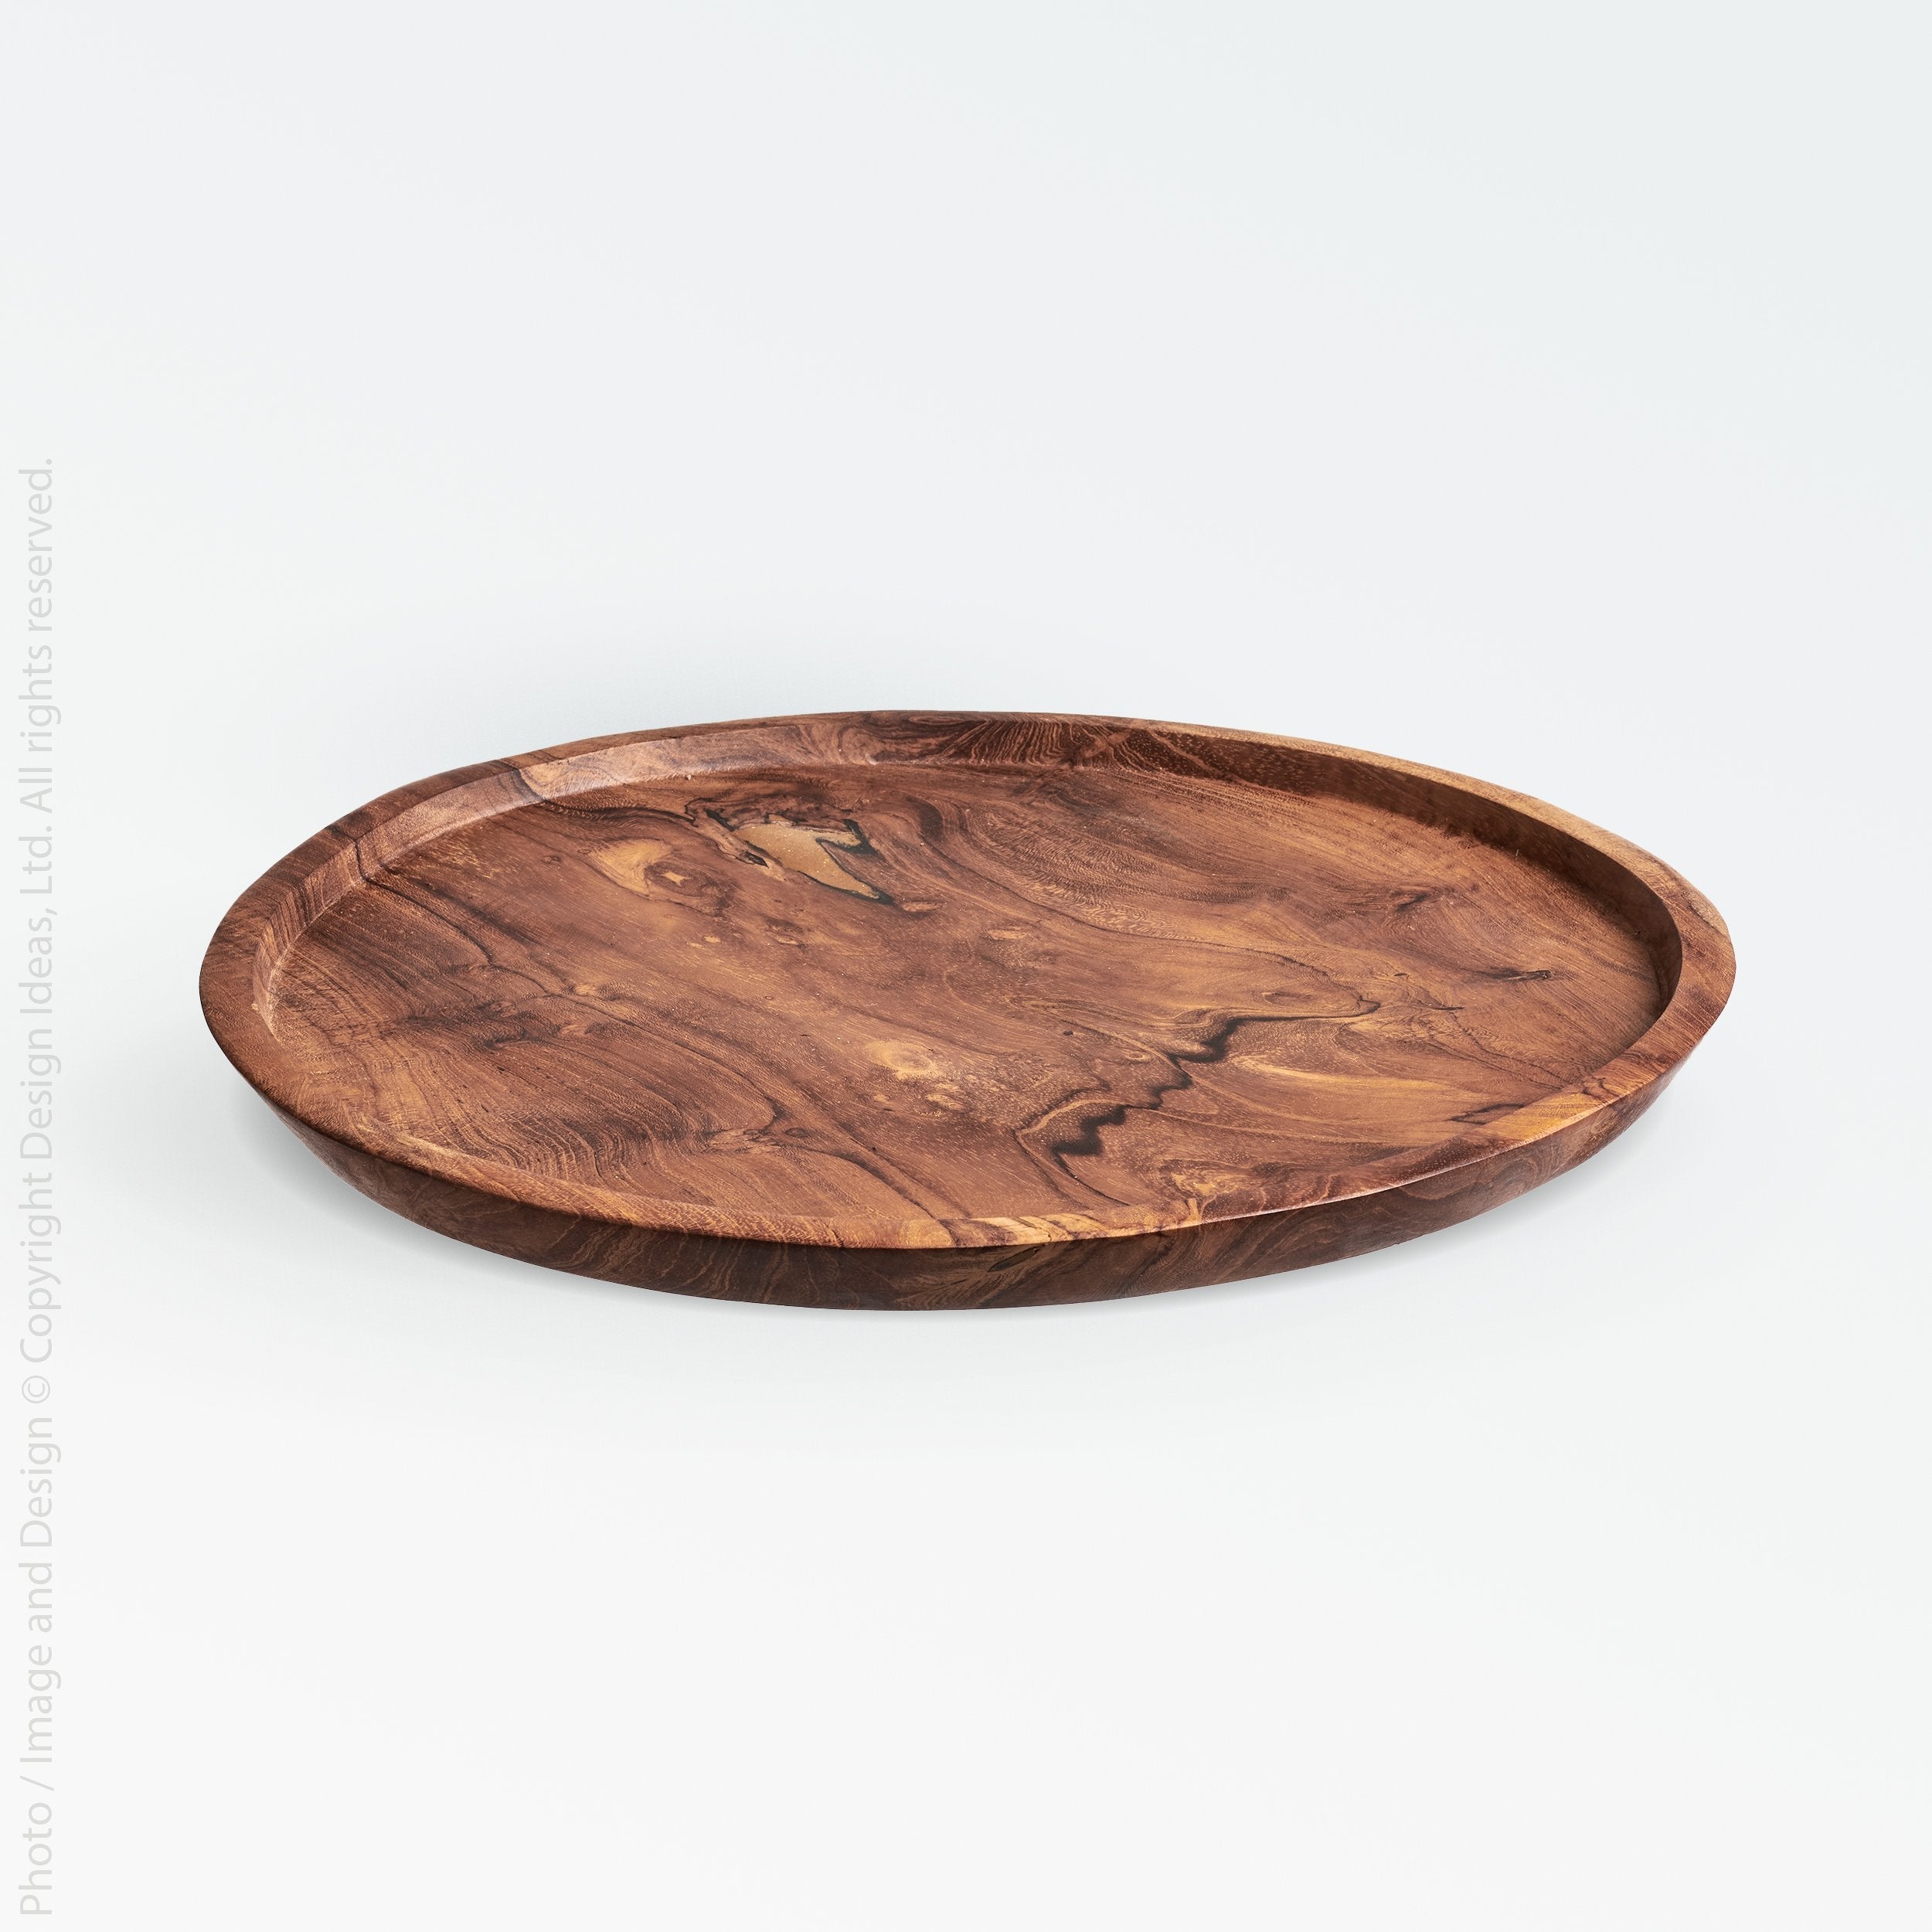 Chiku Teak Tray (Medium) - Black Color | Image 1 | From the Chiku Collection | Skillfully crafted with natural teak for long lasting use | This tray is sustainably sourced | Available in natural color | texxture home